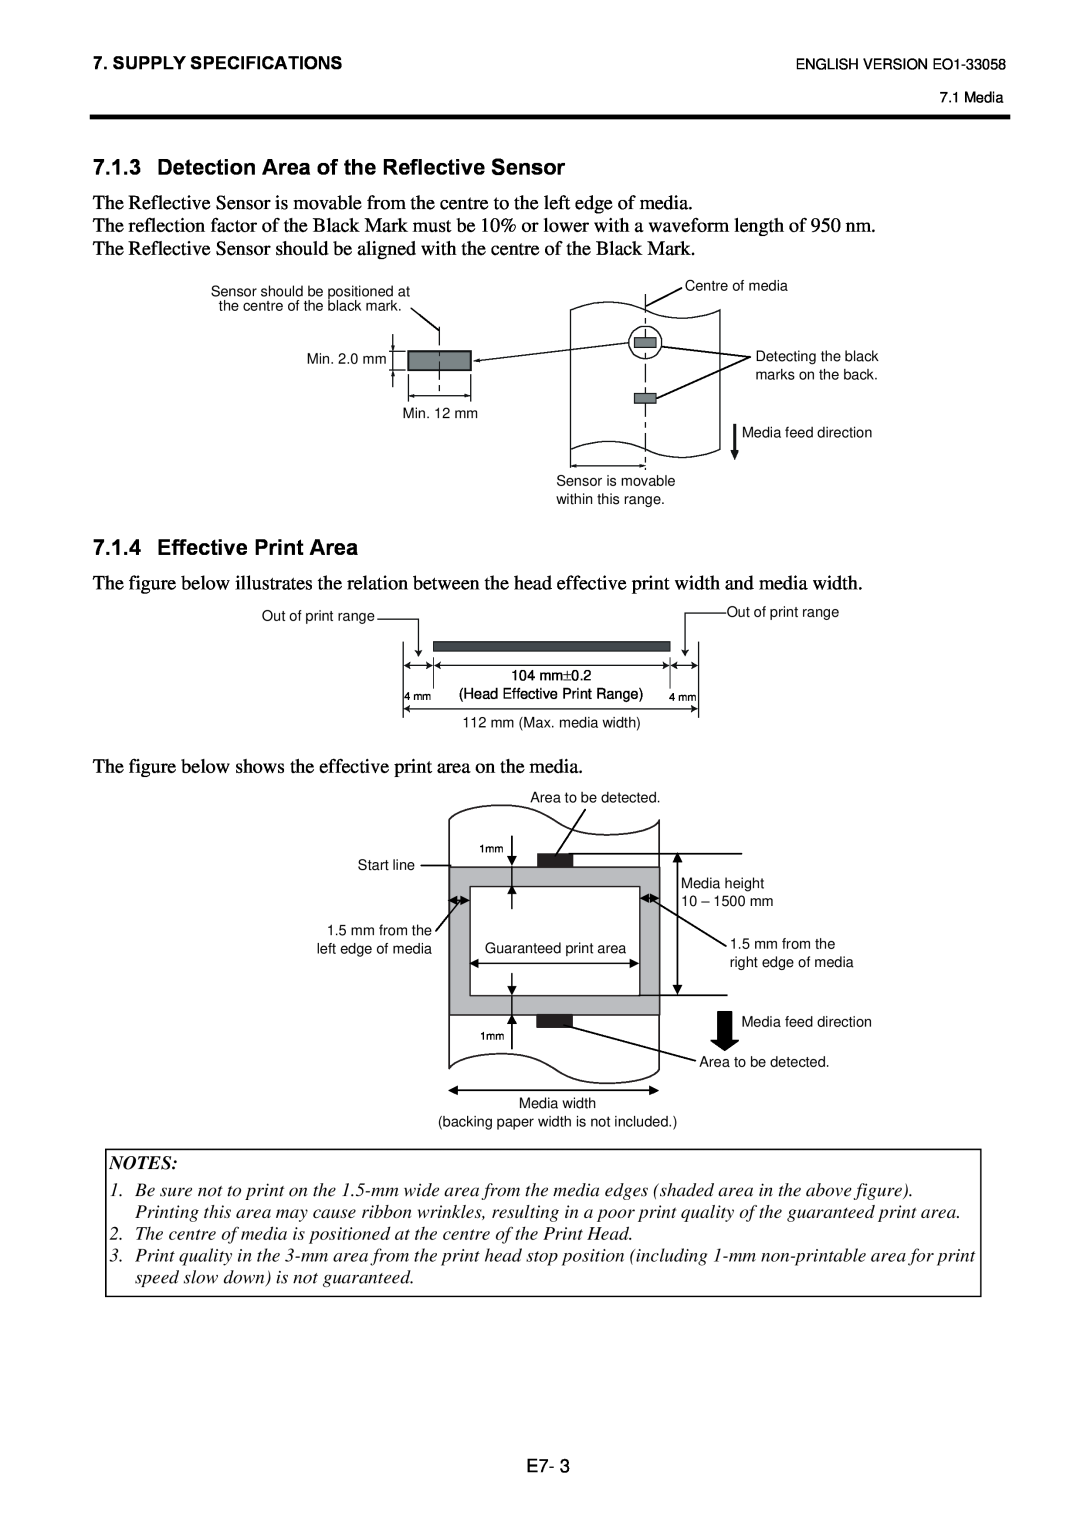 Toshiba B-SX4T owner manual Detection Area of the Reflective Sensor, Effective Print Area 